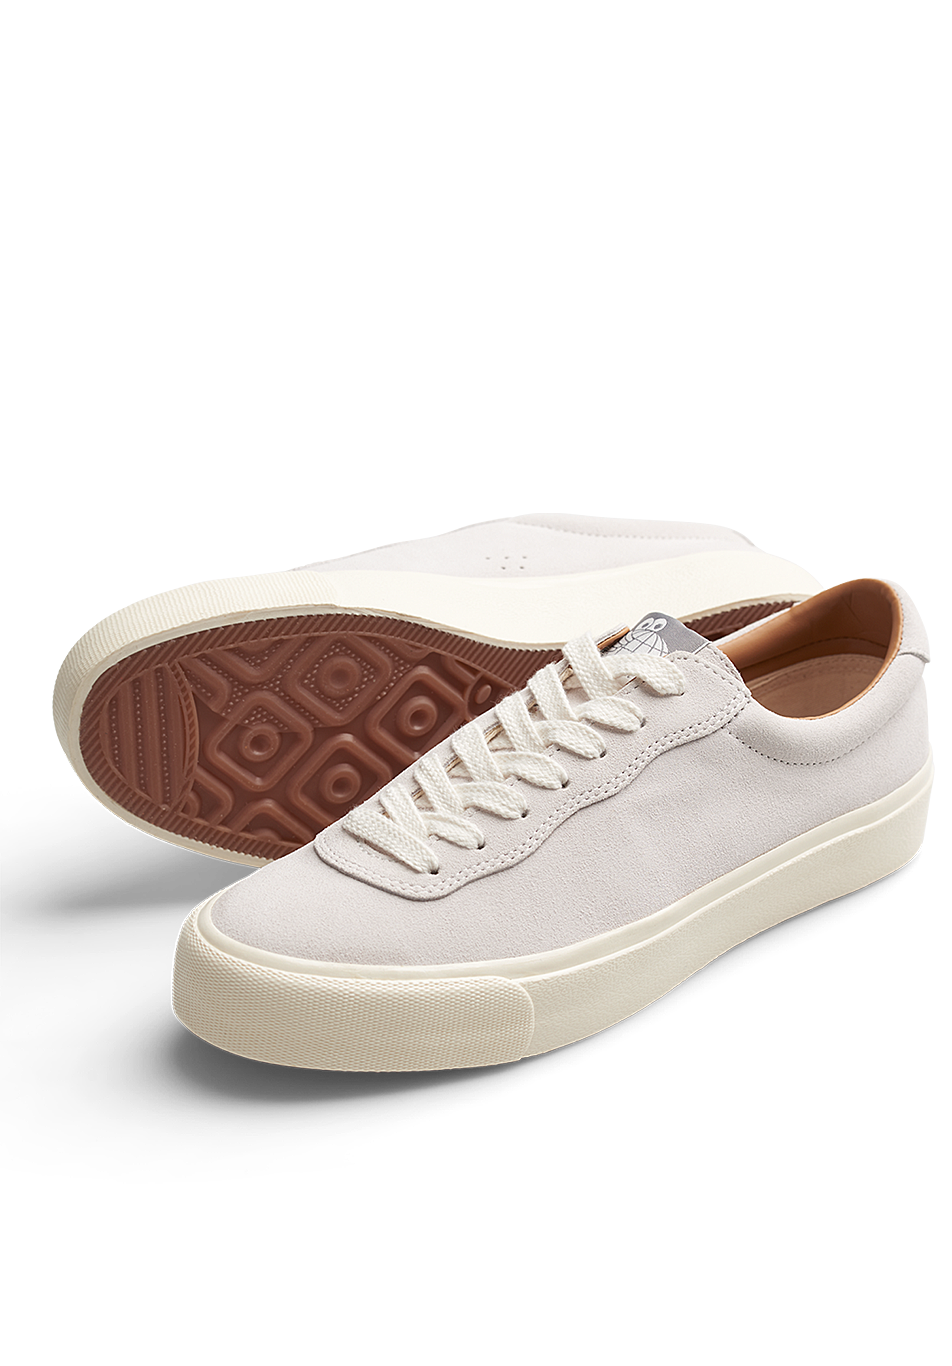 Last Resort AB VM001 Suede Lo All White ONLINE ONLY